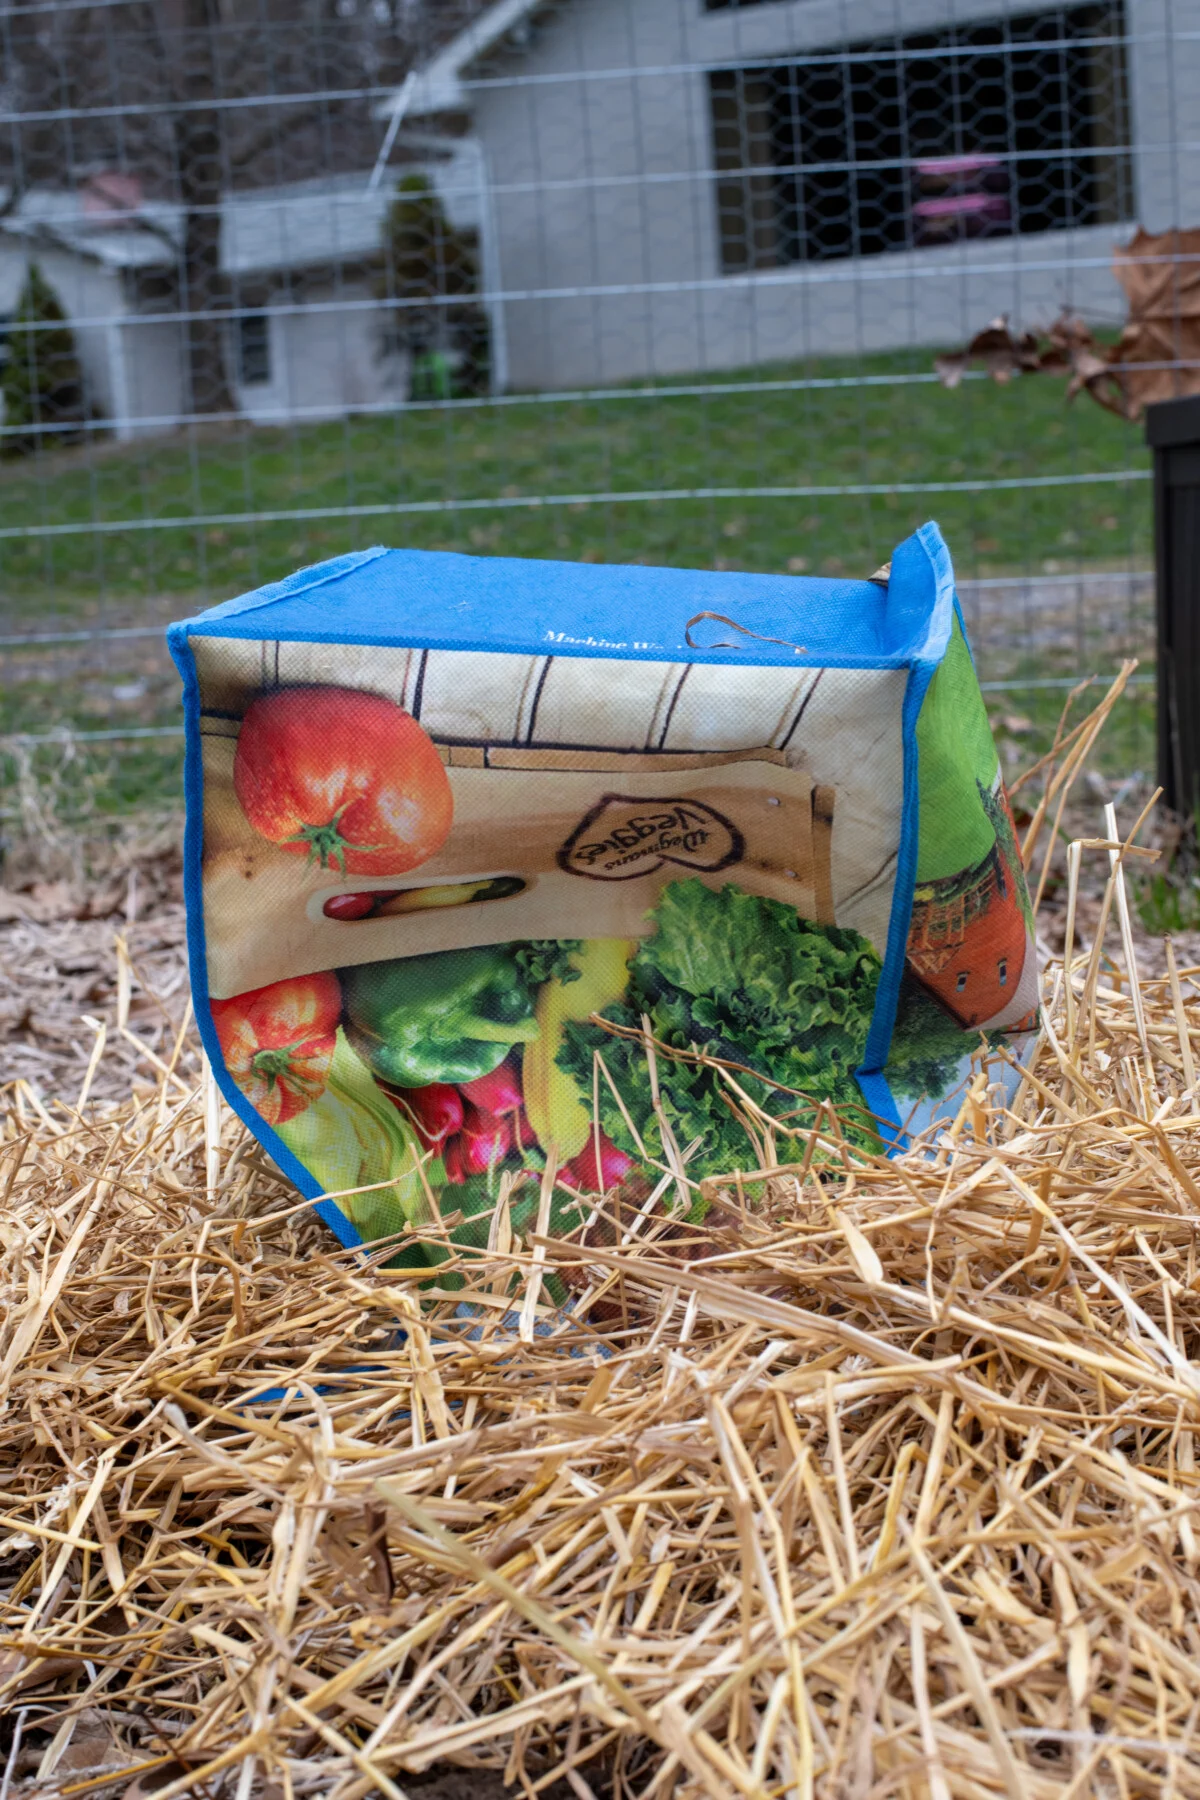 Reusable shopping bag being used as a cloche in the garden